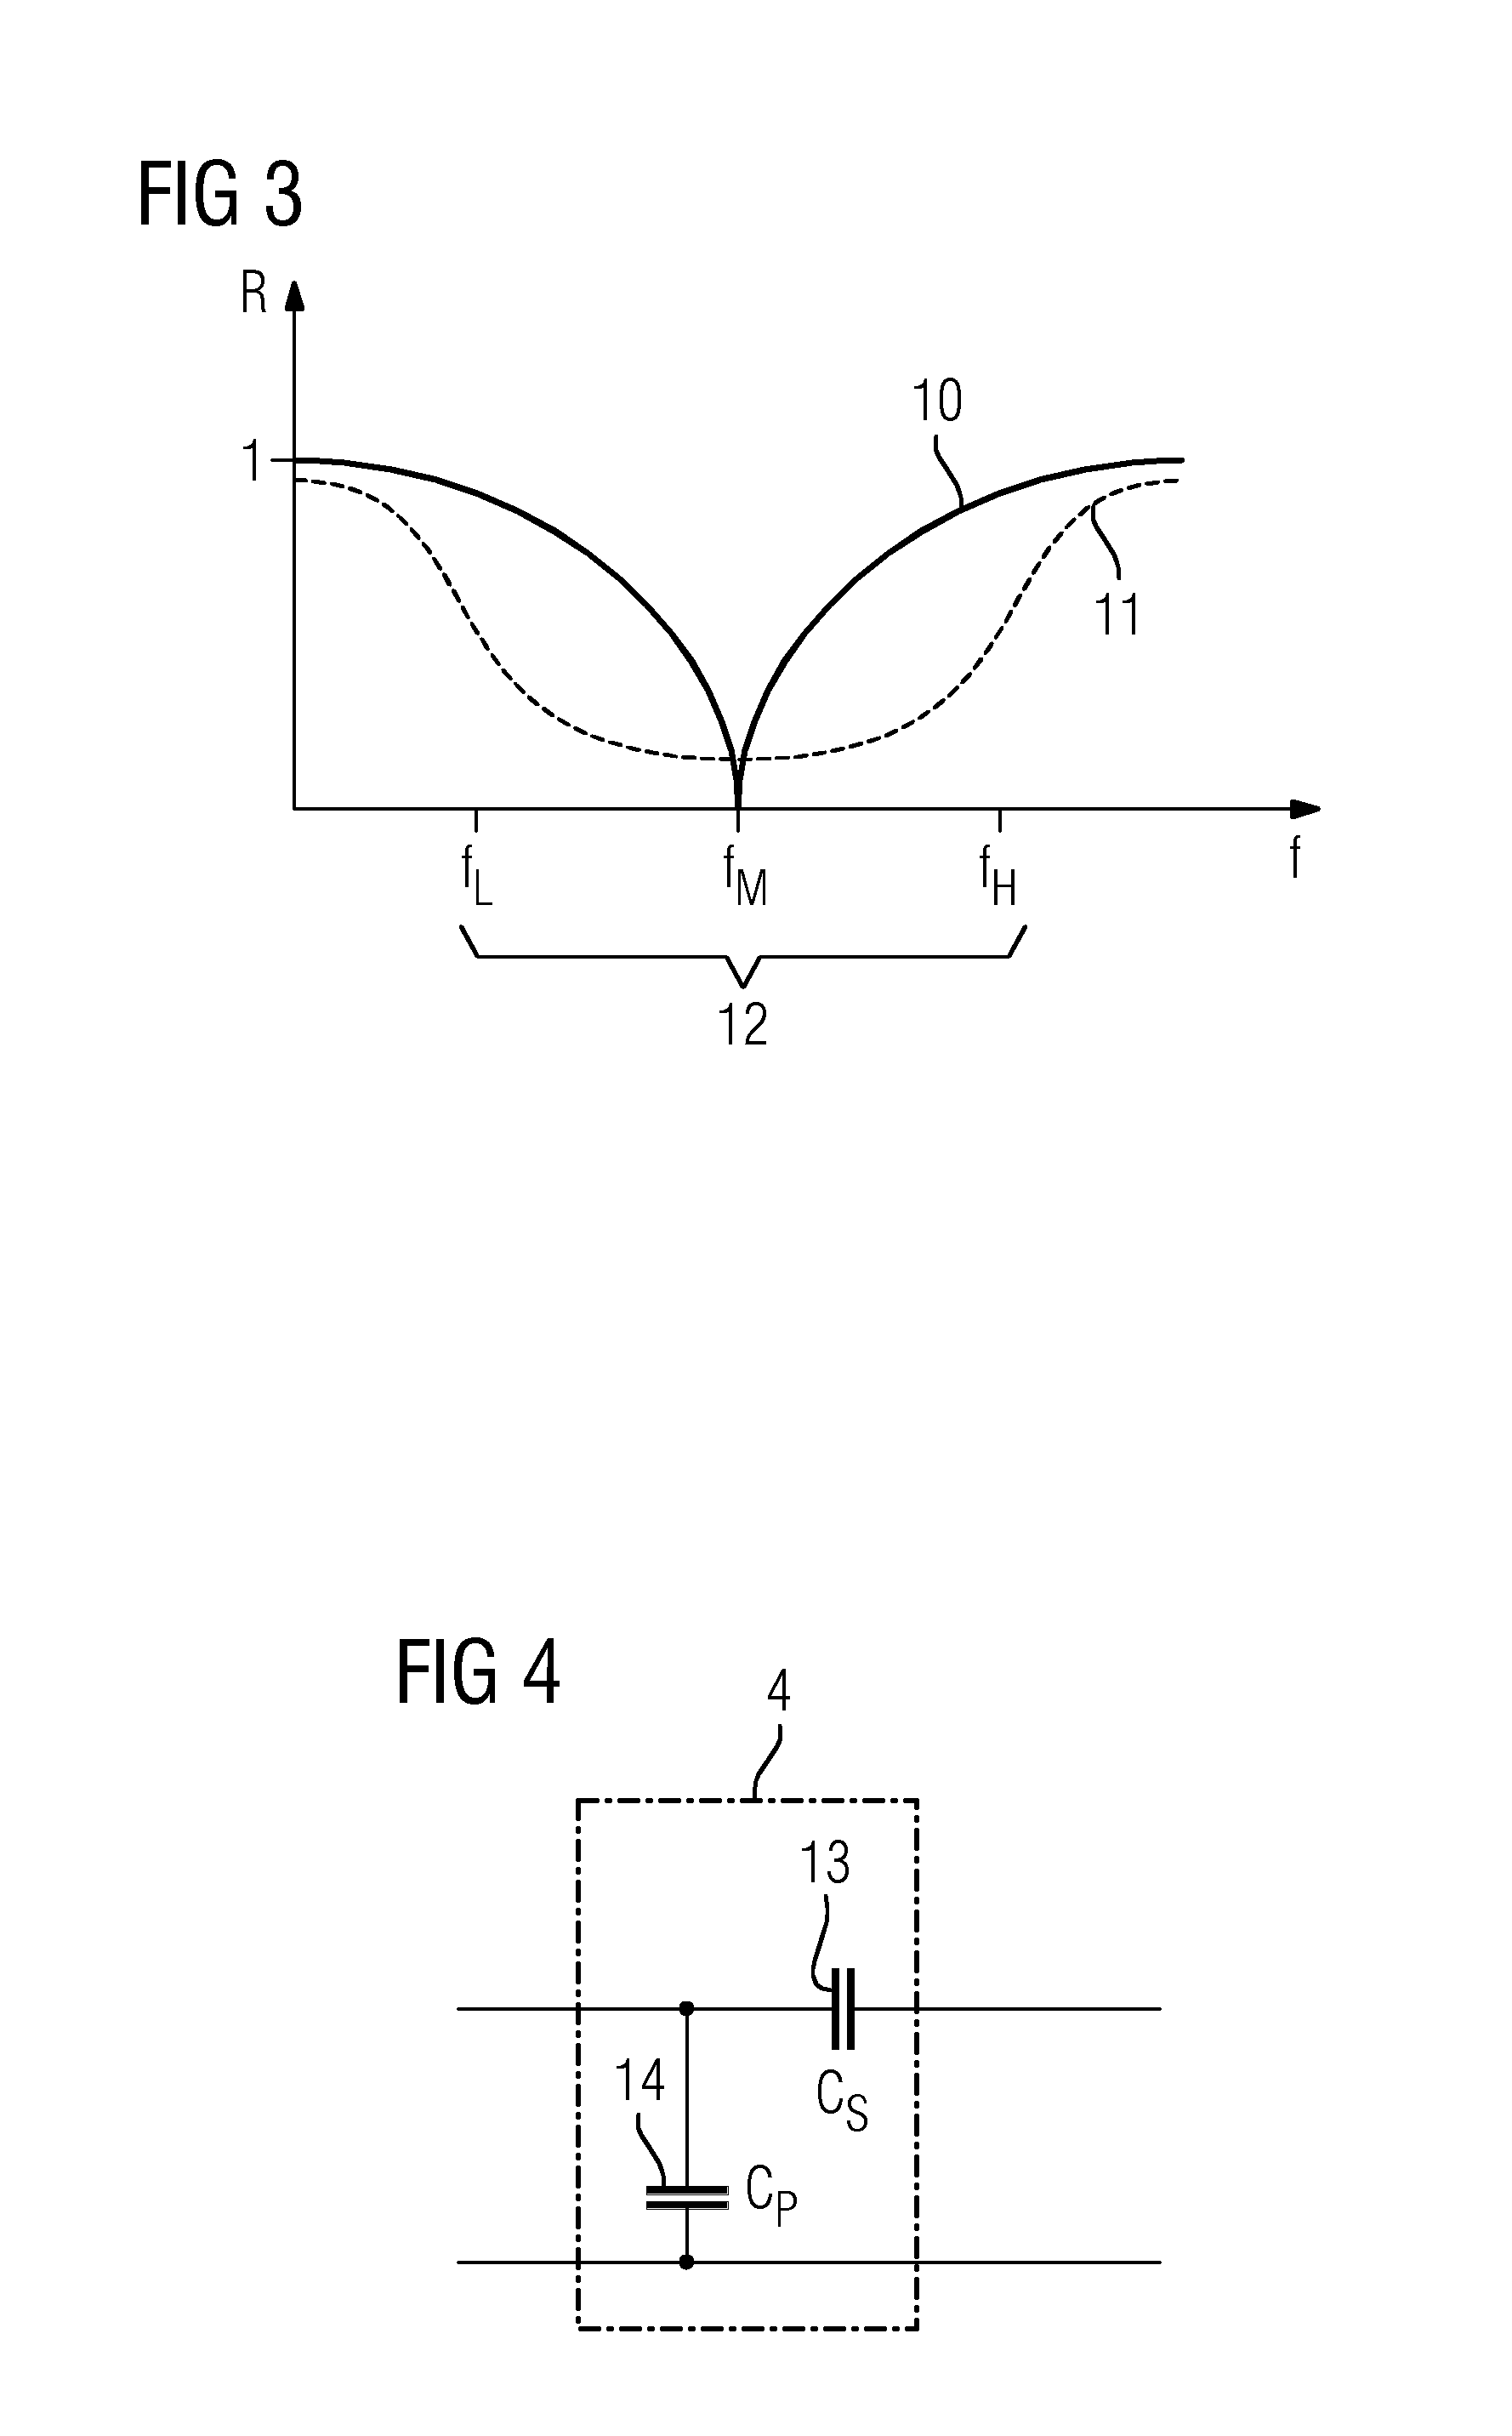 Reduction of Coupling Effects Between Coil Elements of a Magnetic Resonance Coil Arrangement